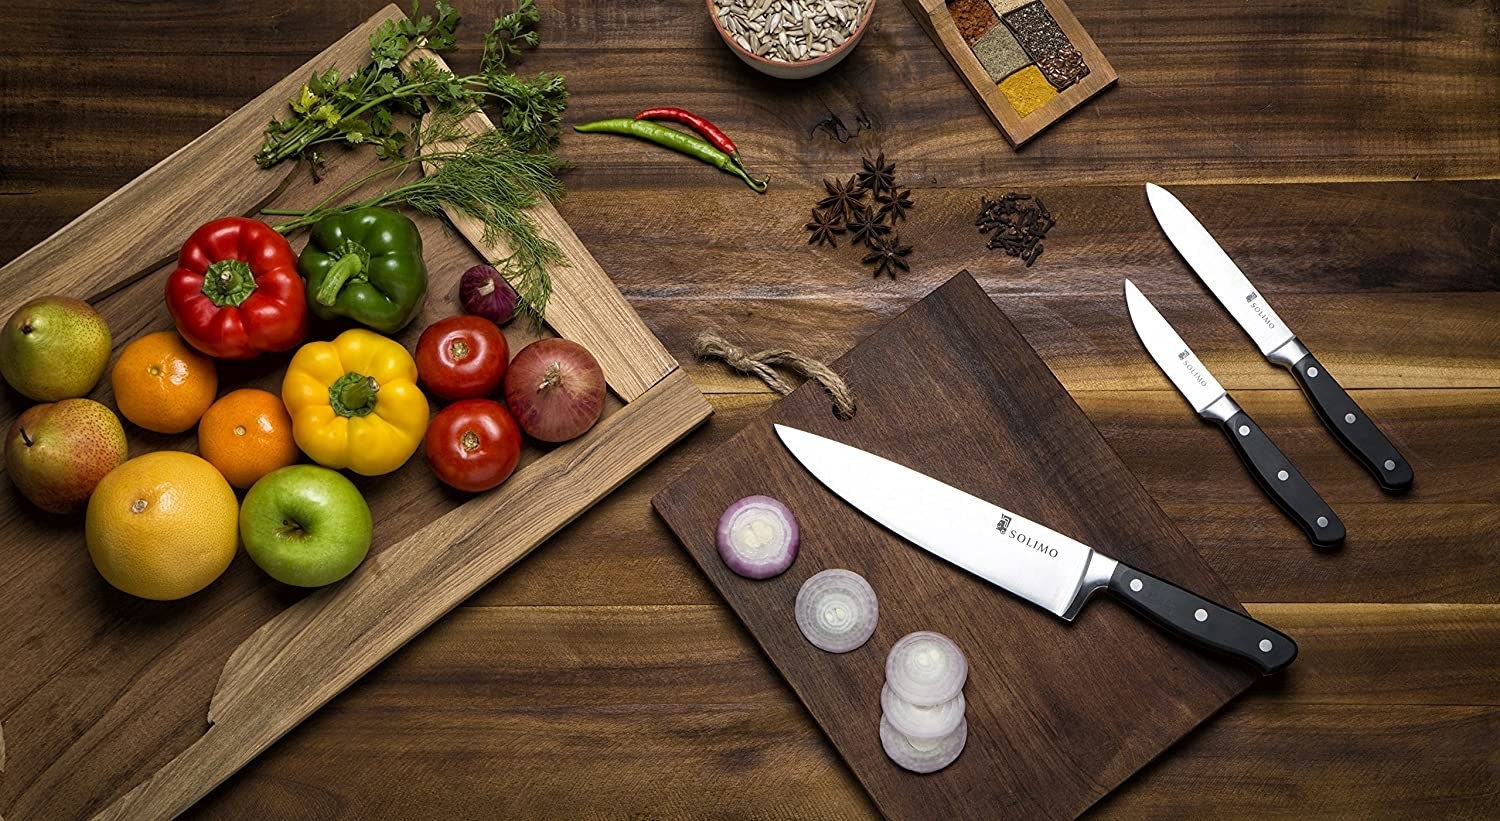 The knives are kept on a wooden chopping board. Vegetables and spices are kept around them.